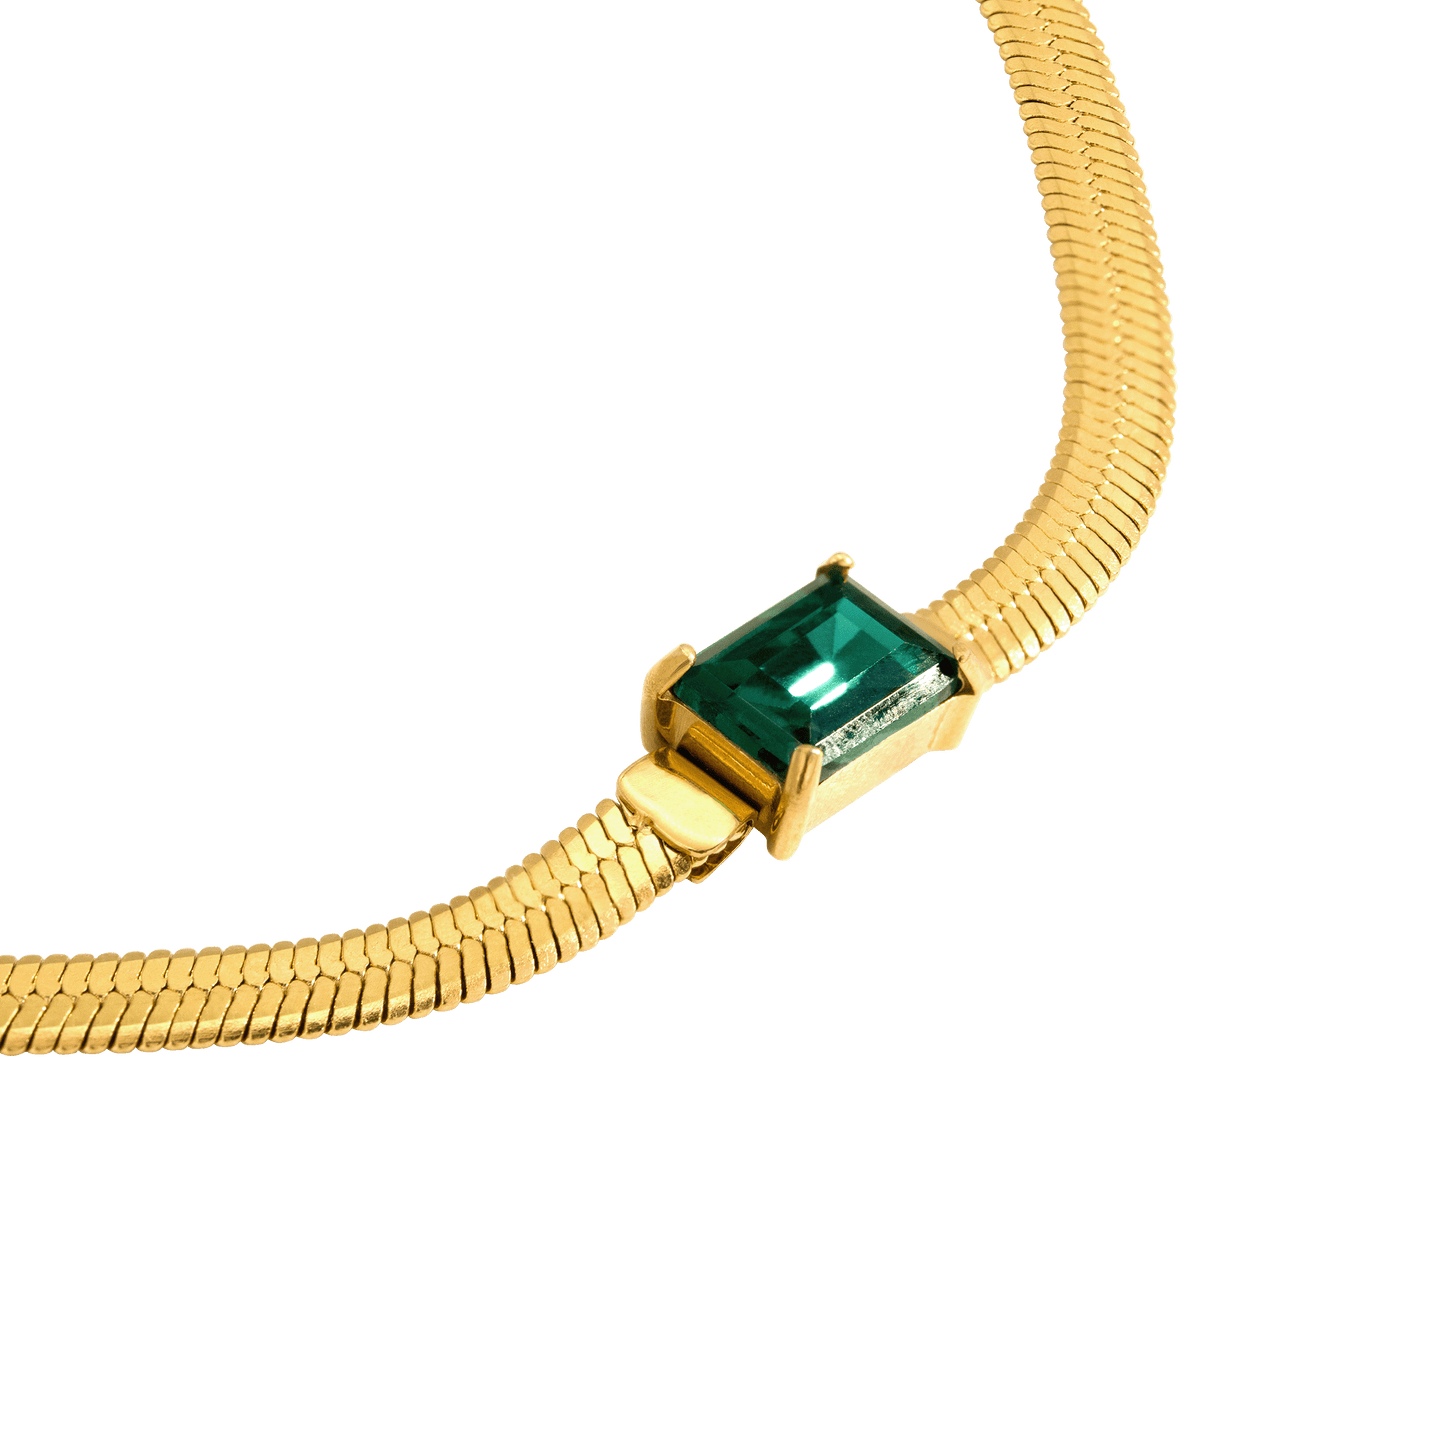 Radiant Emerald Necklace Gold